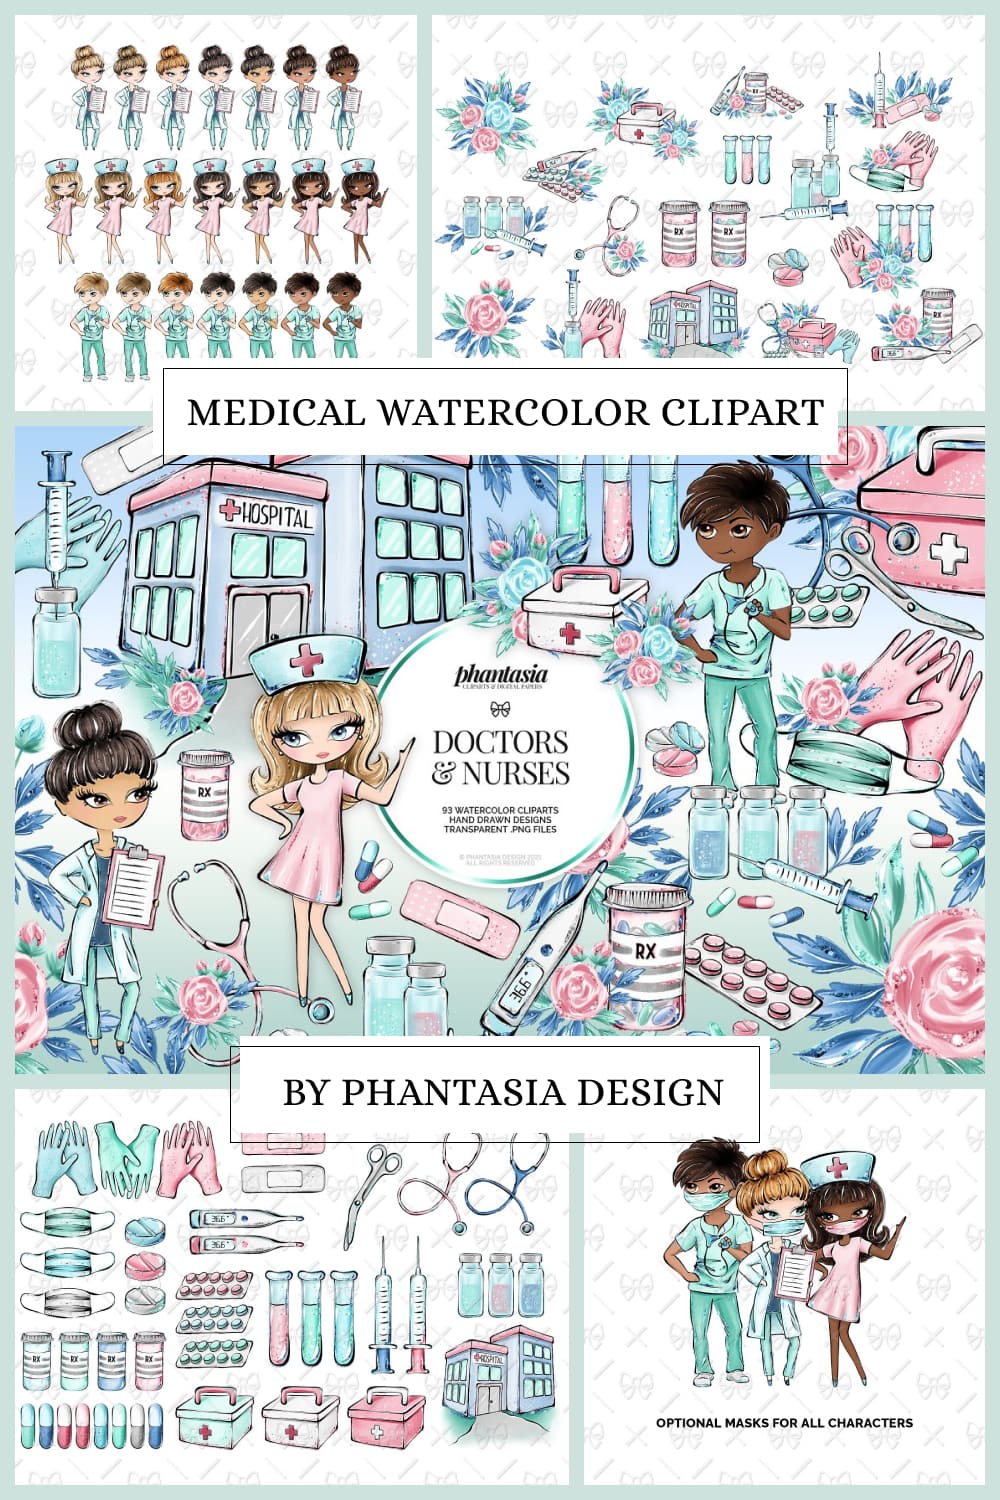 medical watercolor clipart pinterest image.